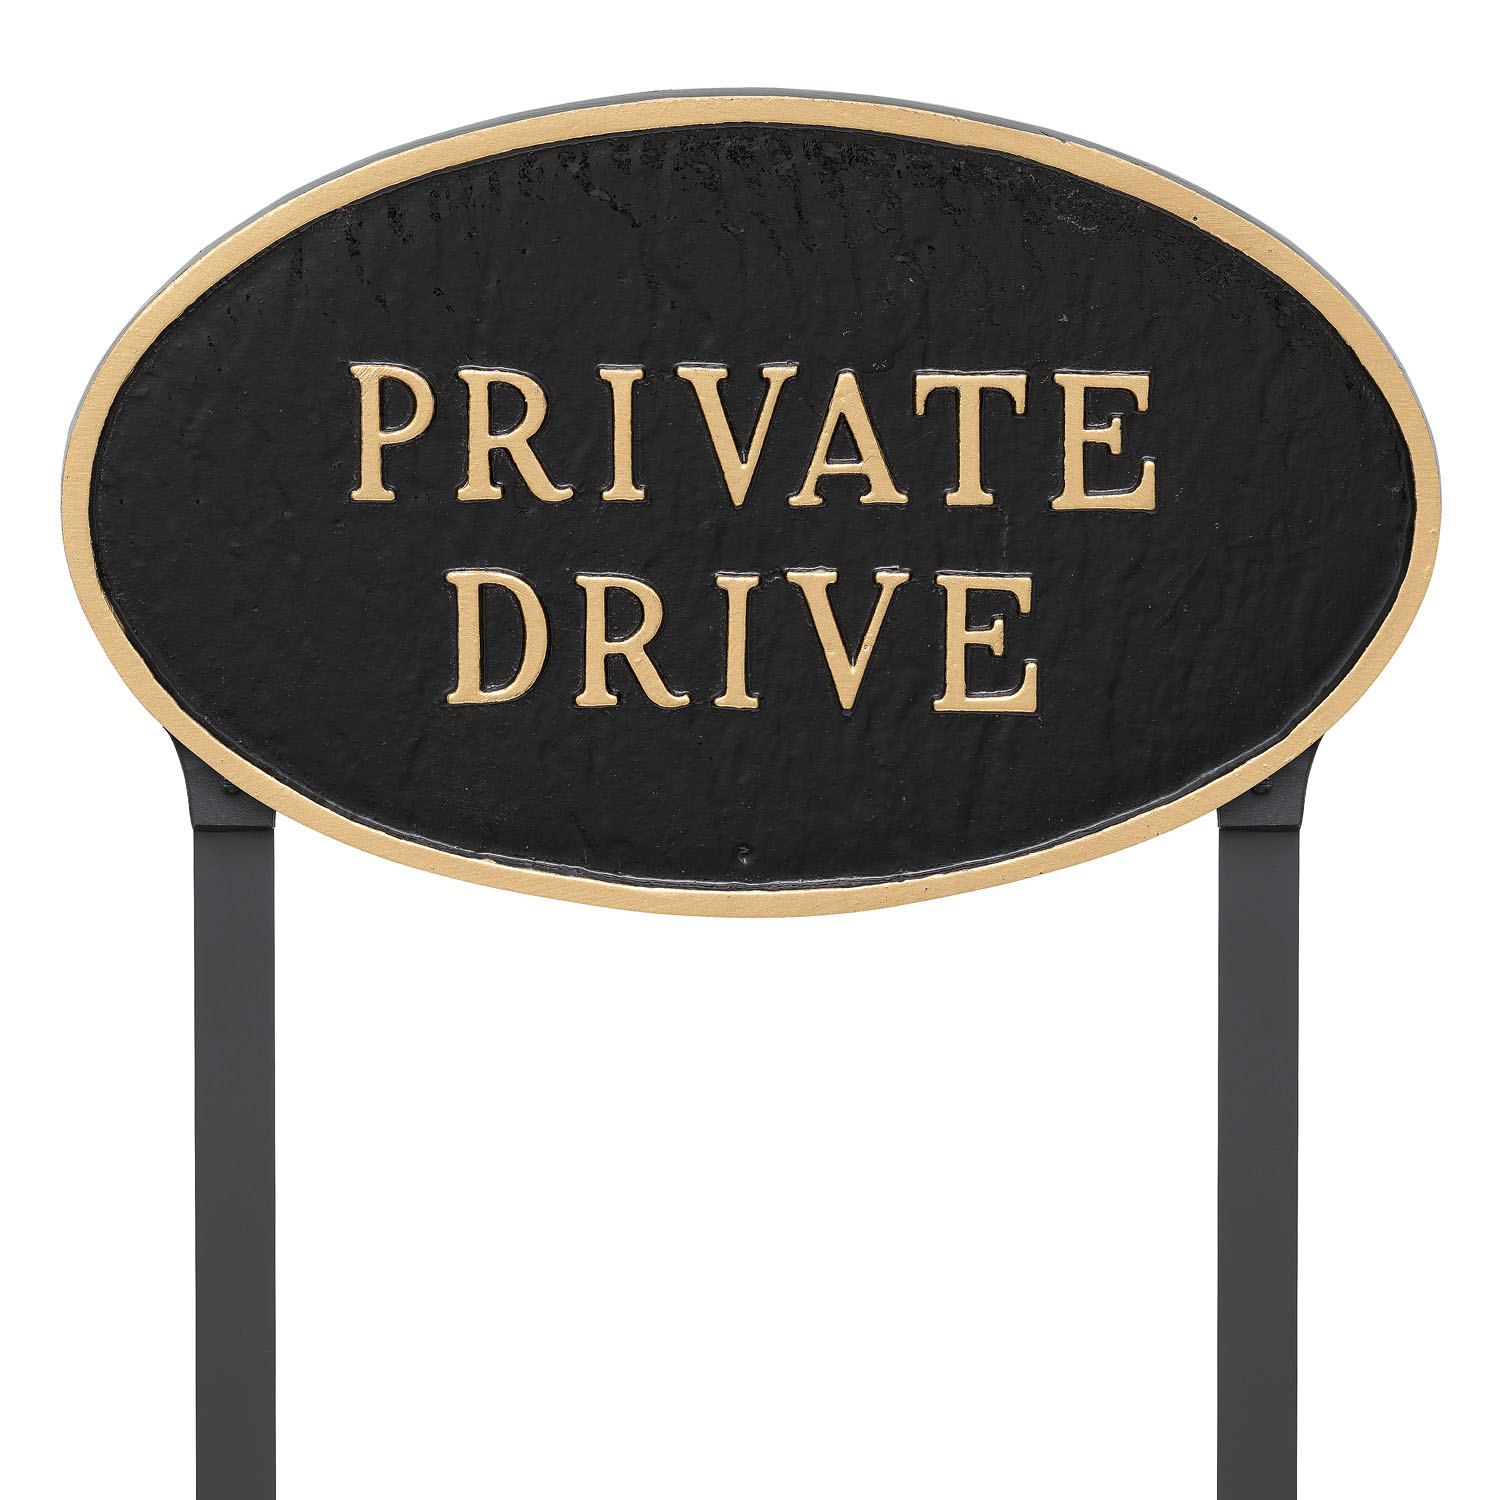 6 x 10 White with Black Lettering Montague Metal Products Oval Private Residence Statement Plaque Sign 